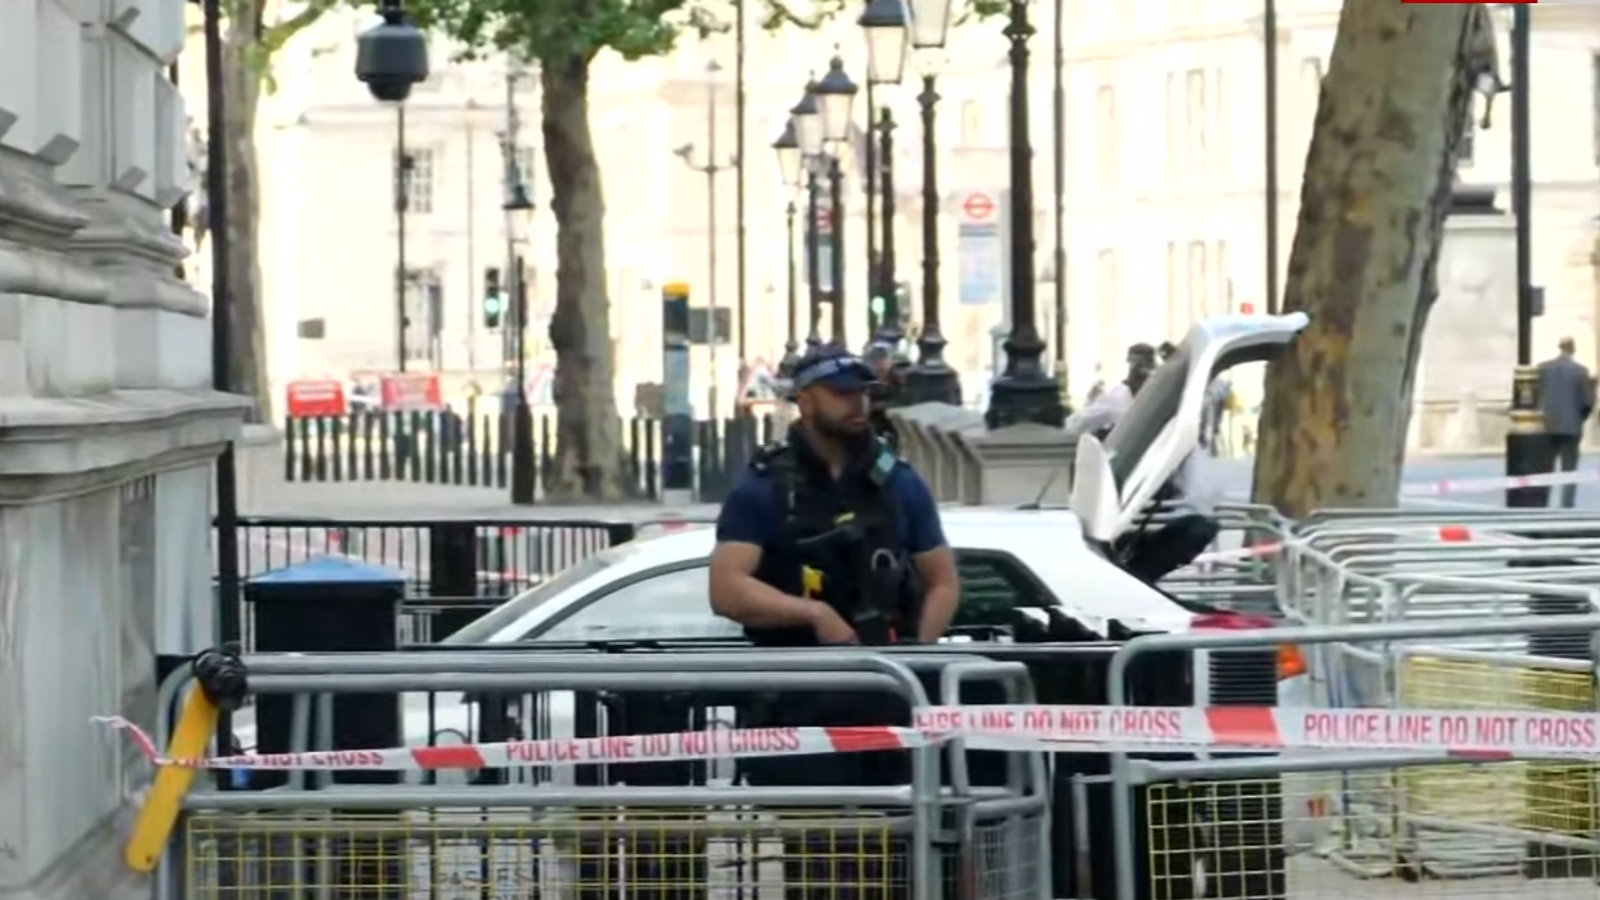 One person arrested after car hits Downing Street gates